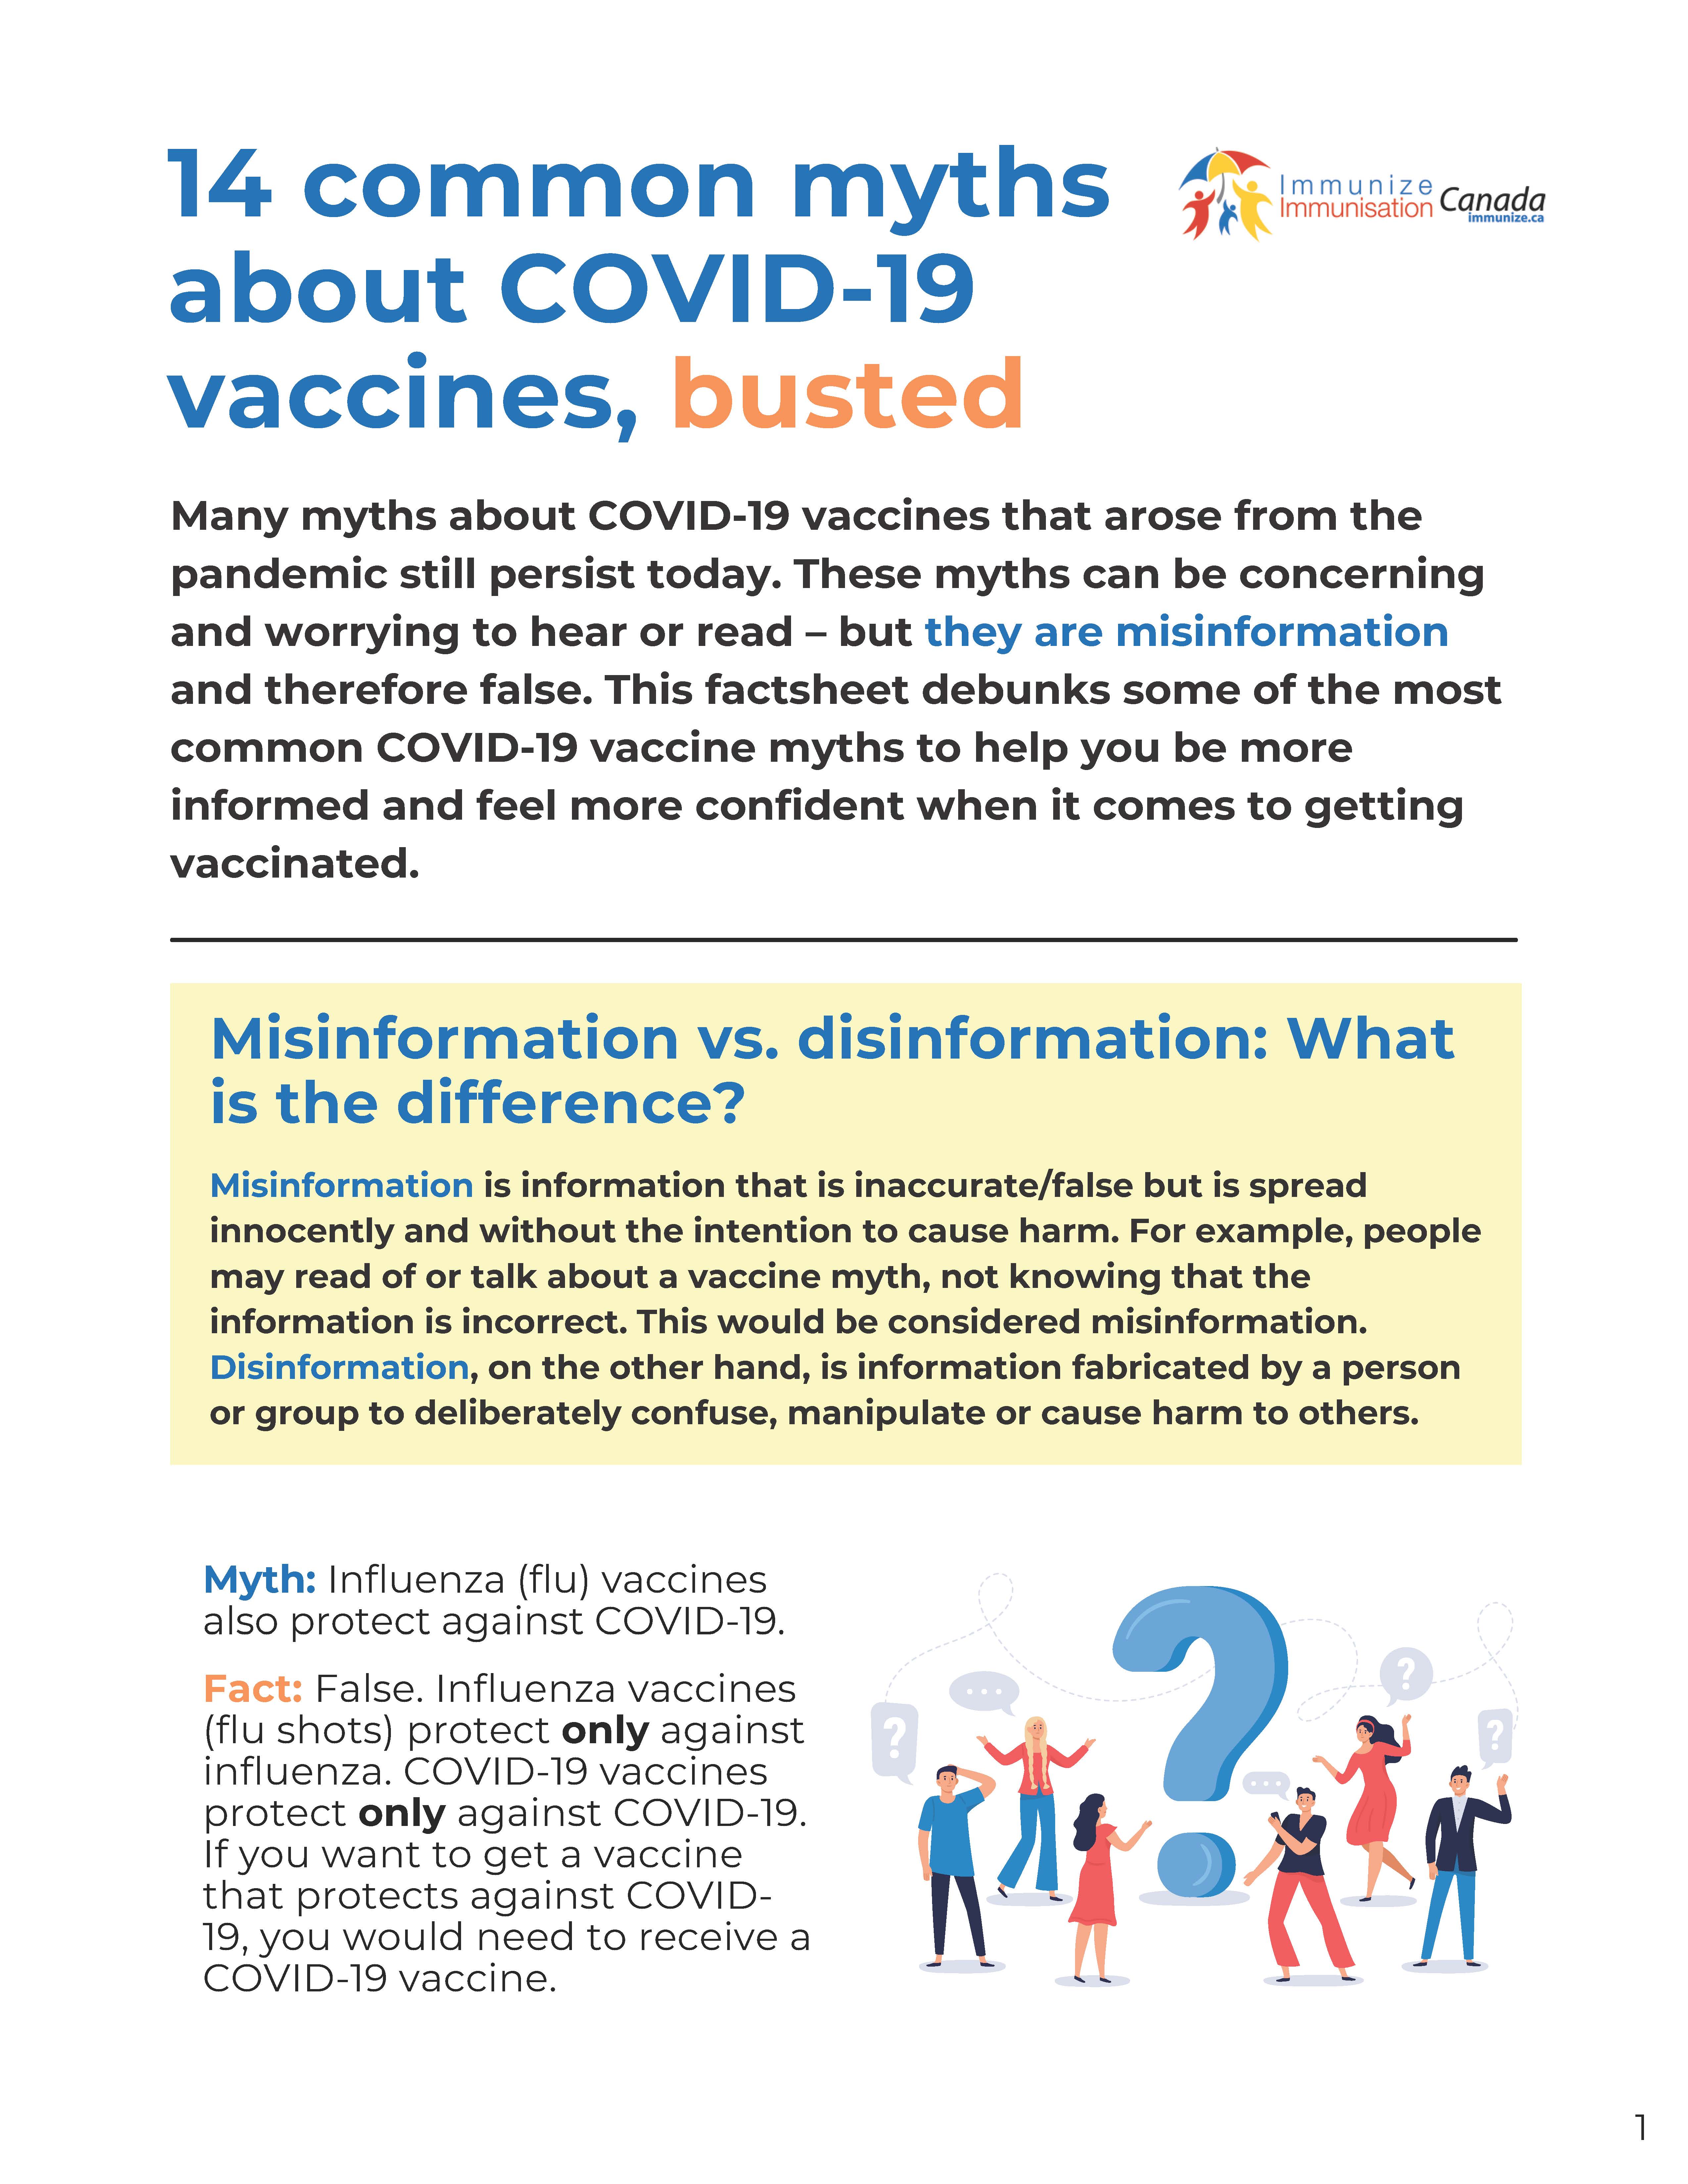 14 common myths about COVID-19 vaccines, busted